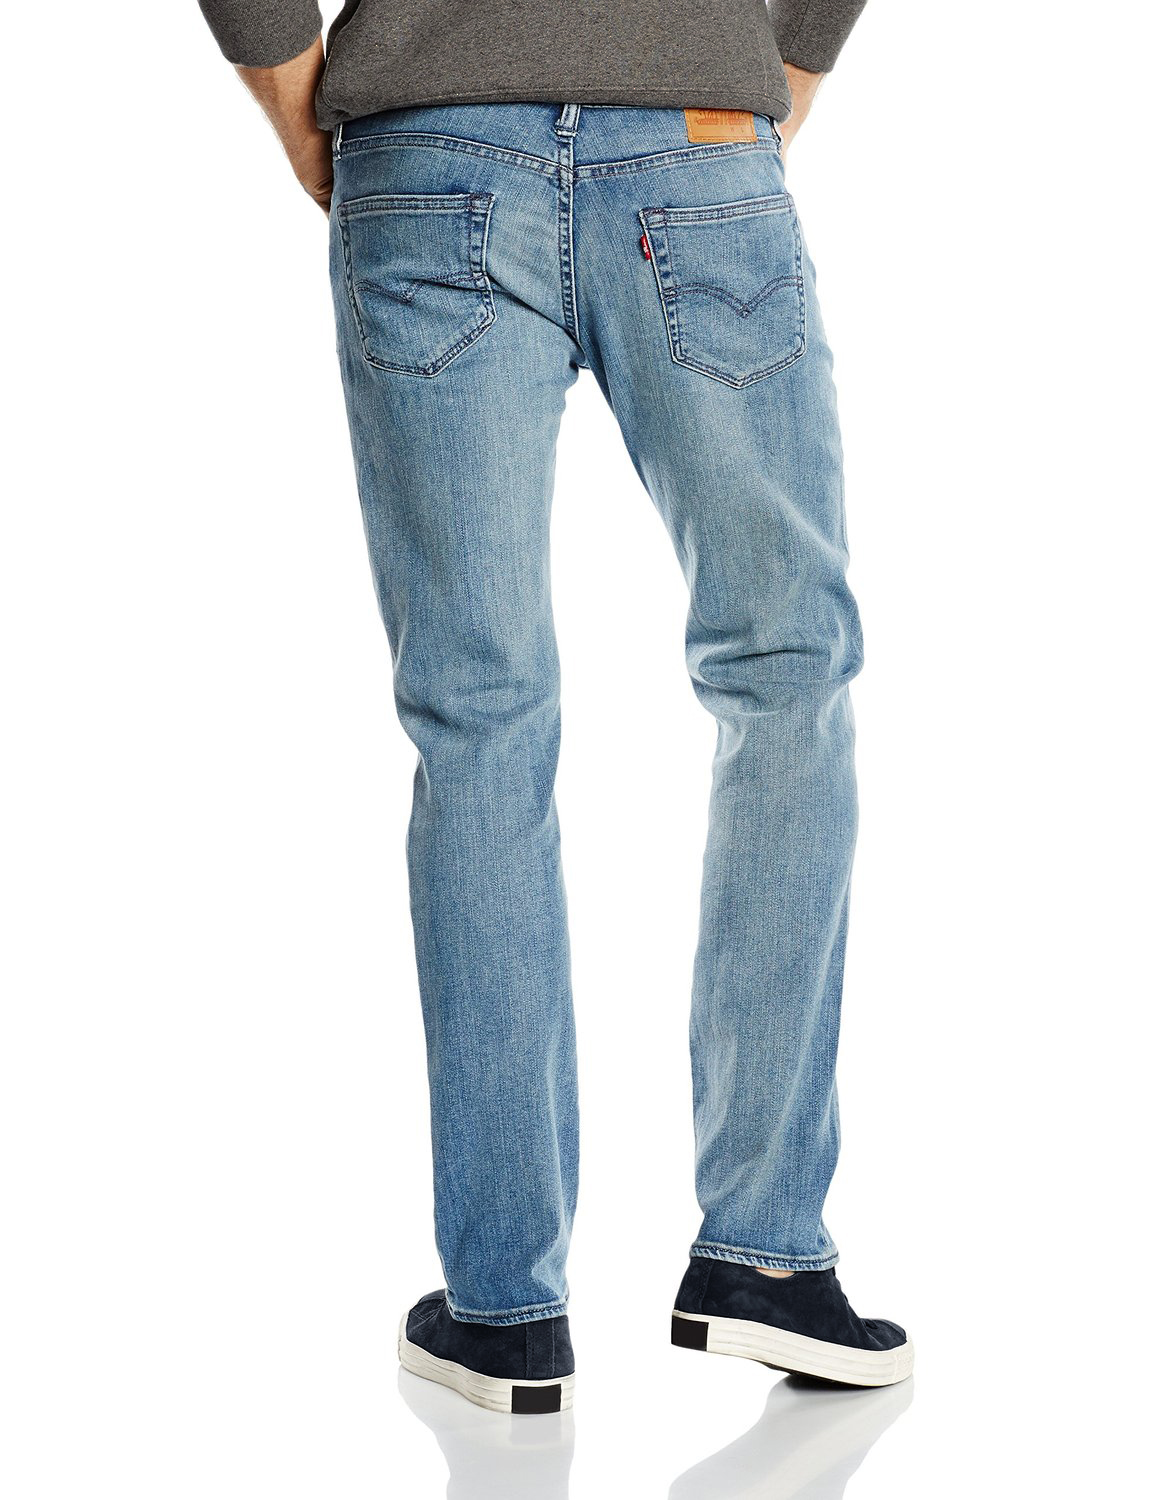 Levi's New Mens 511 Slim Fit Jeans Faded Canyon Blue Tapered Stretch ...